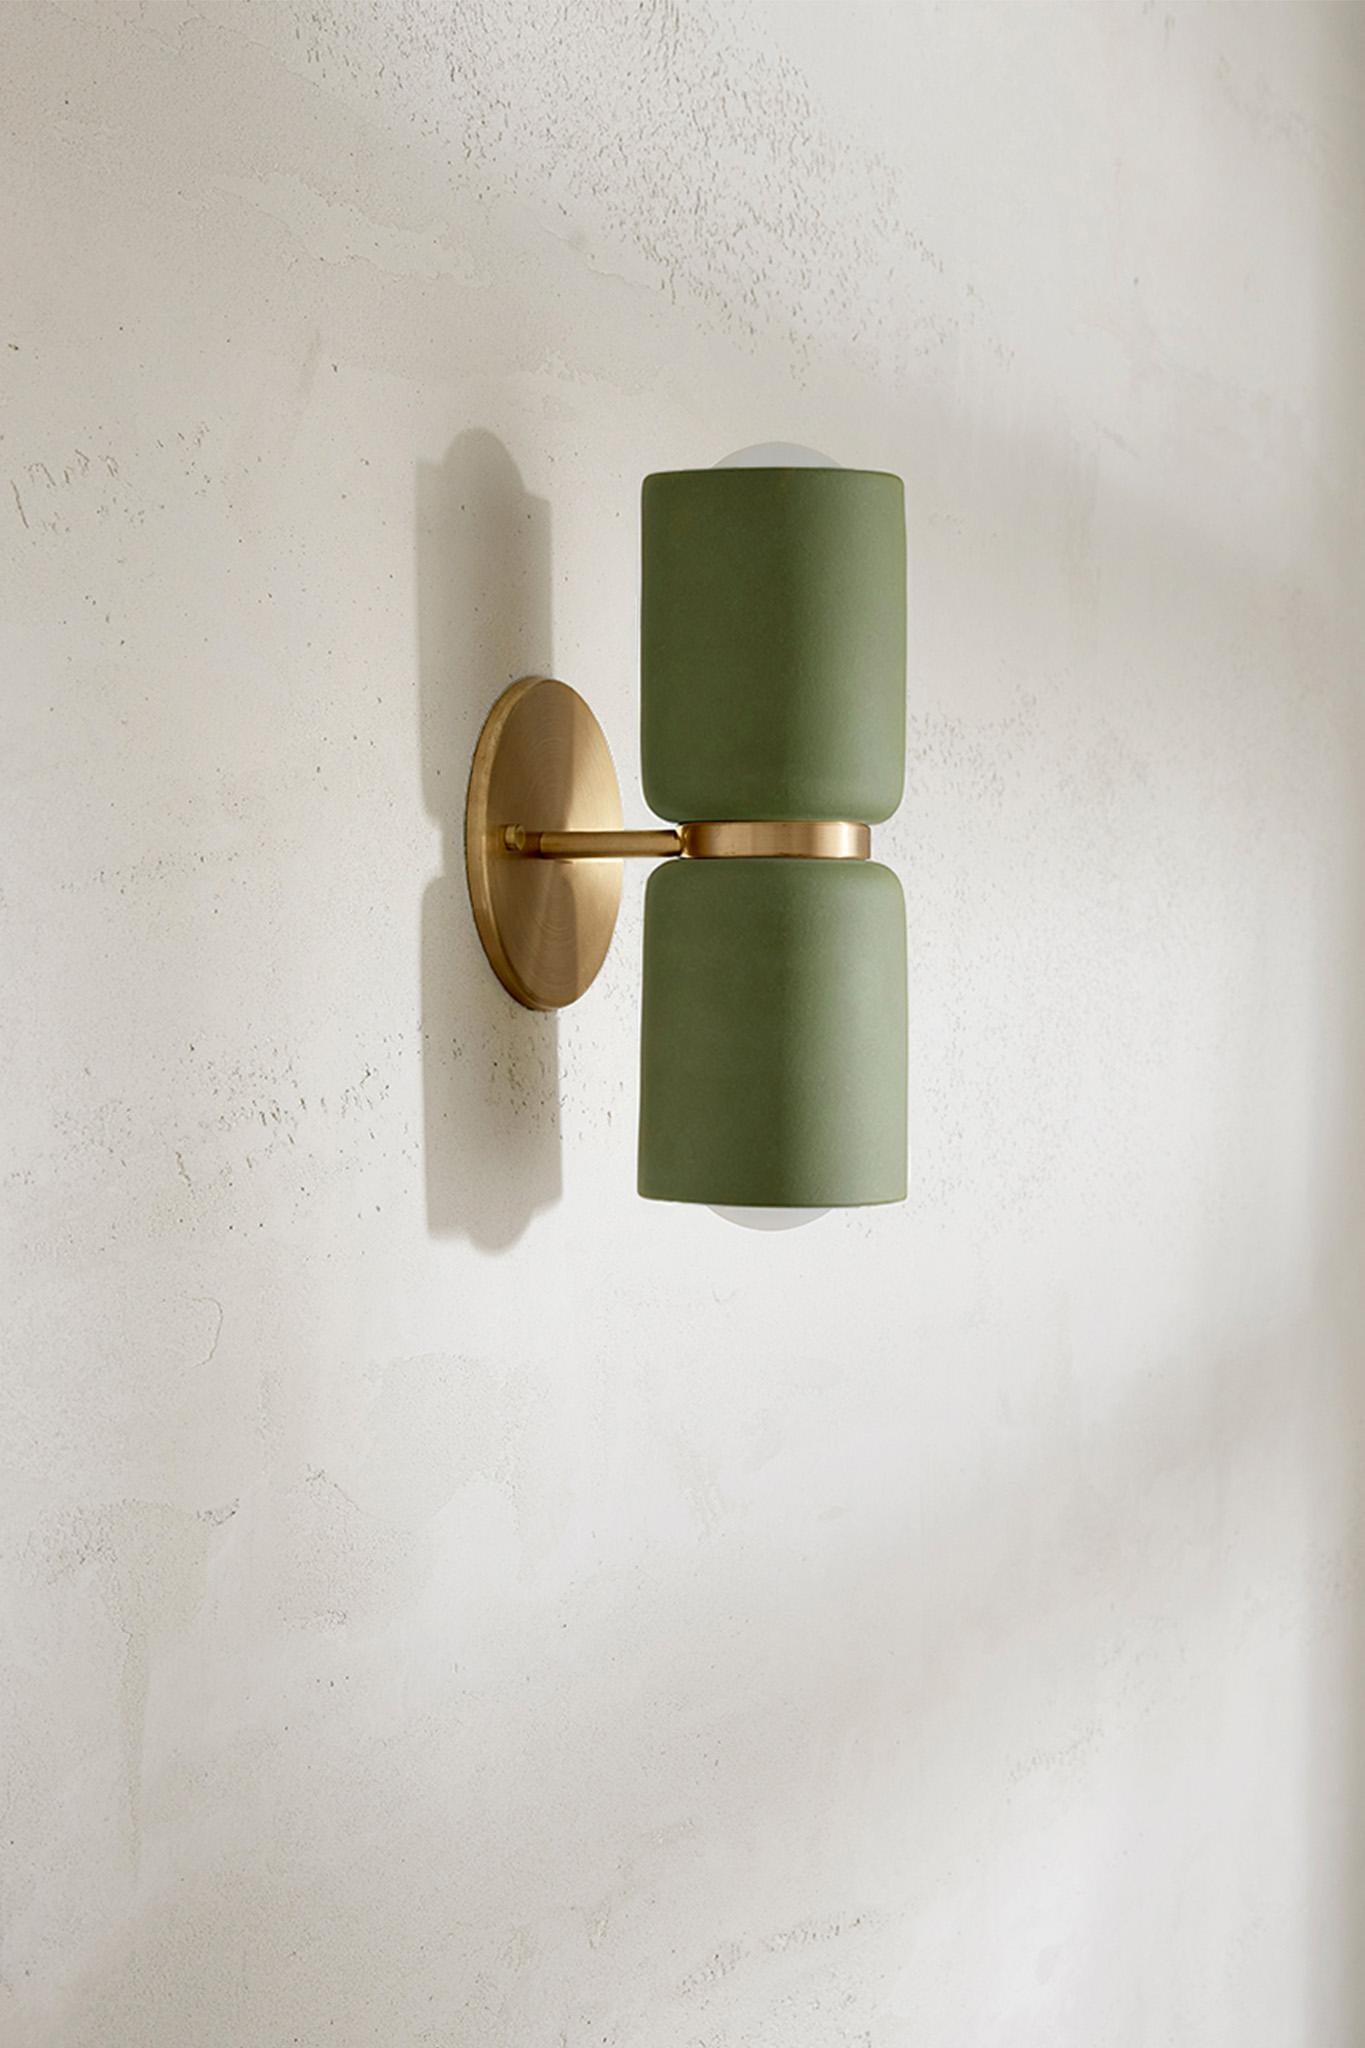 The Terra 2 Wall Light features two slip-cast lamp holders with unique brass, brushed black or white satin detailing. A duo of ceramic cylinders stack together to form a bi-directional wall light suitable for both residential and commercial interior